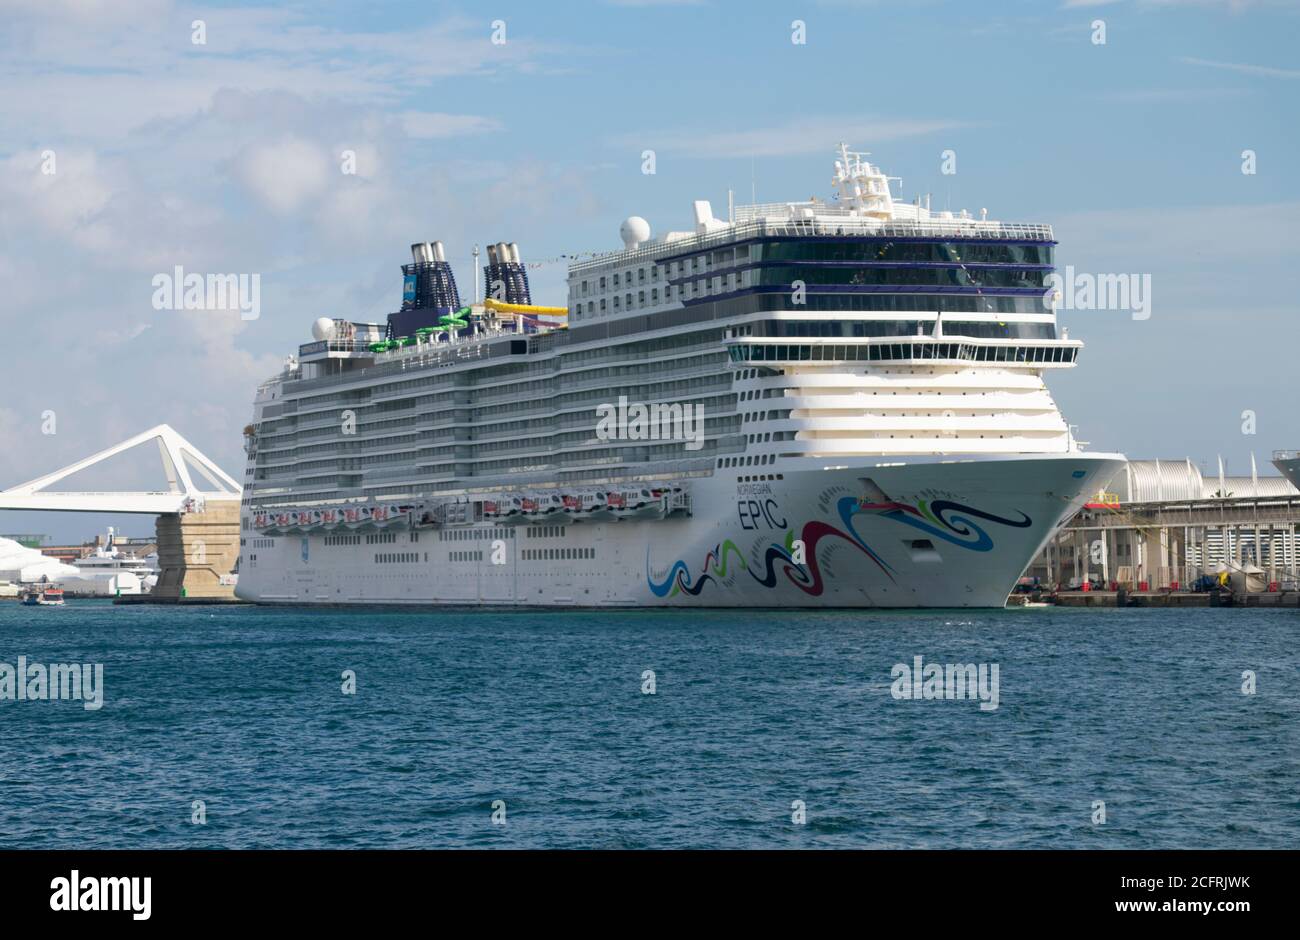 Cruise ship Norwegian Epic of the Norwegian Cruise Line company docked in the port of Barcelona. October 20, 2019. Stock Photo